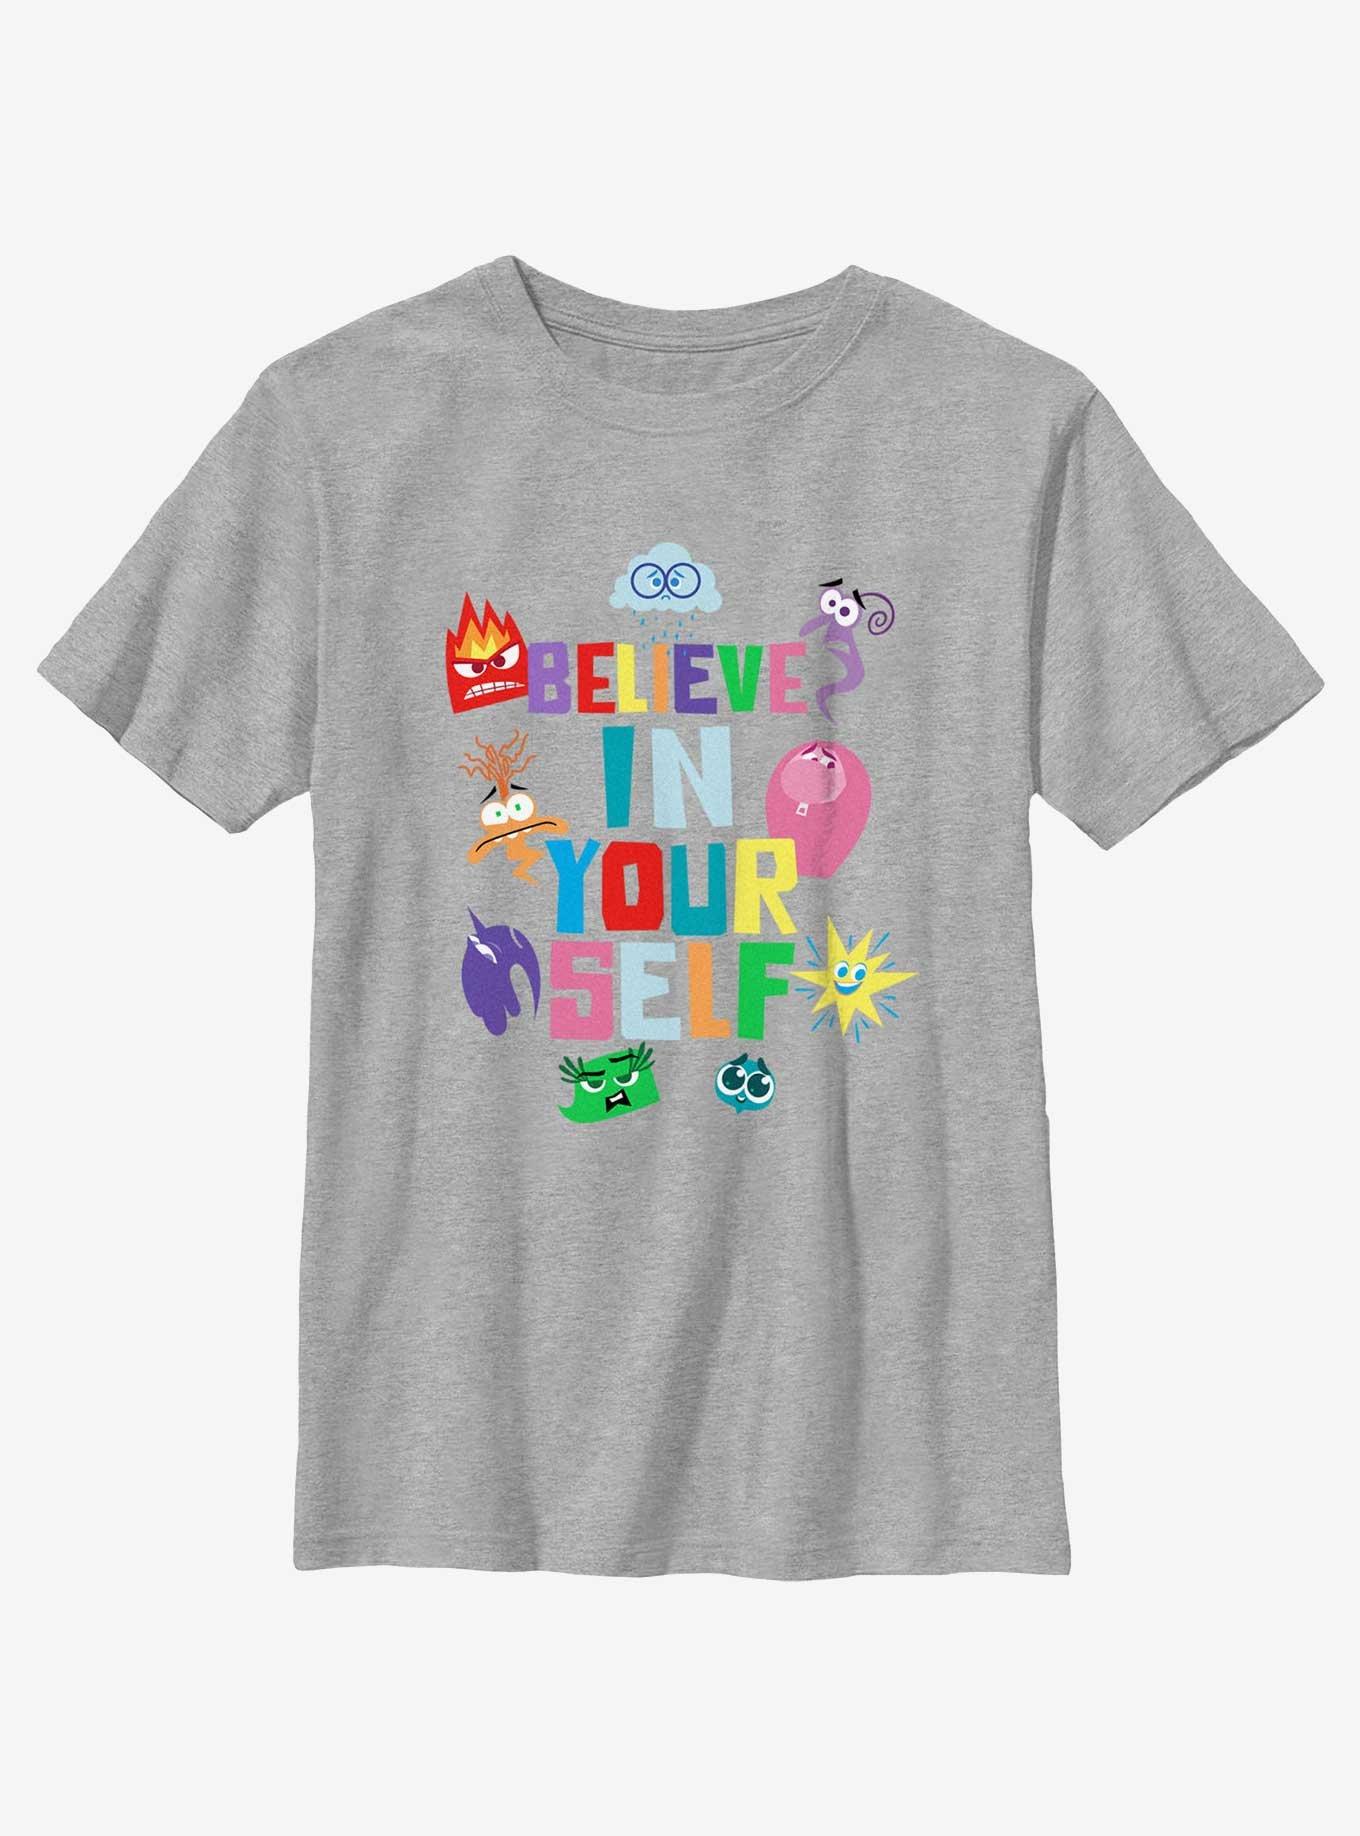 Disney Pixar Inside Out 2 Believe In Your Self Youth T-Shirt, ATH HTR, hi-res